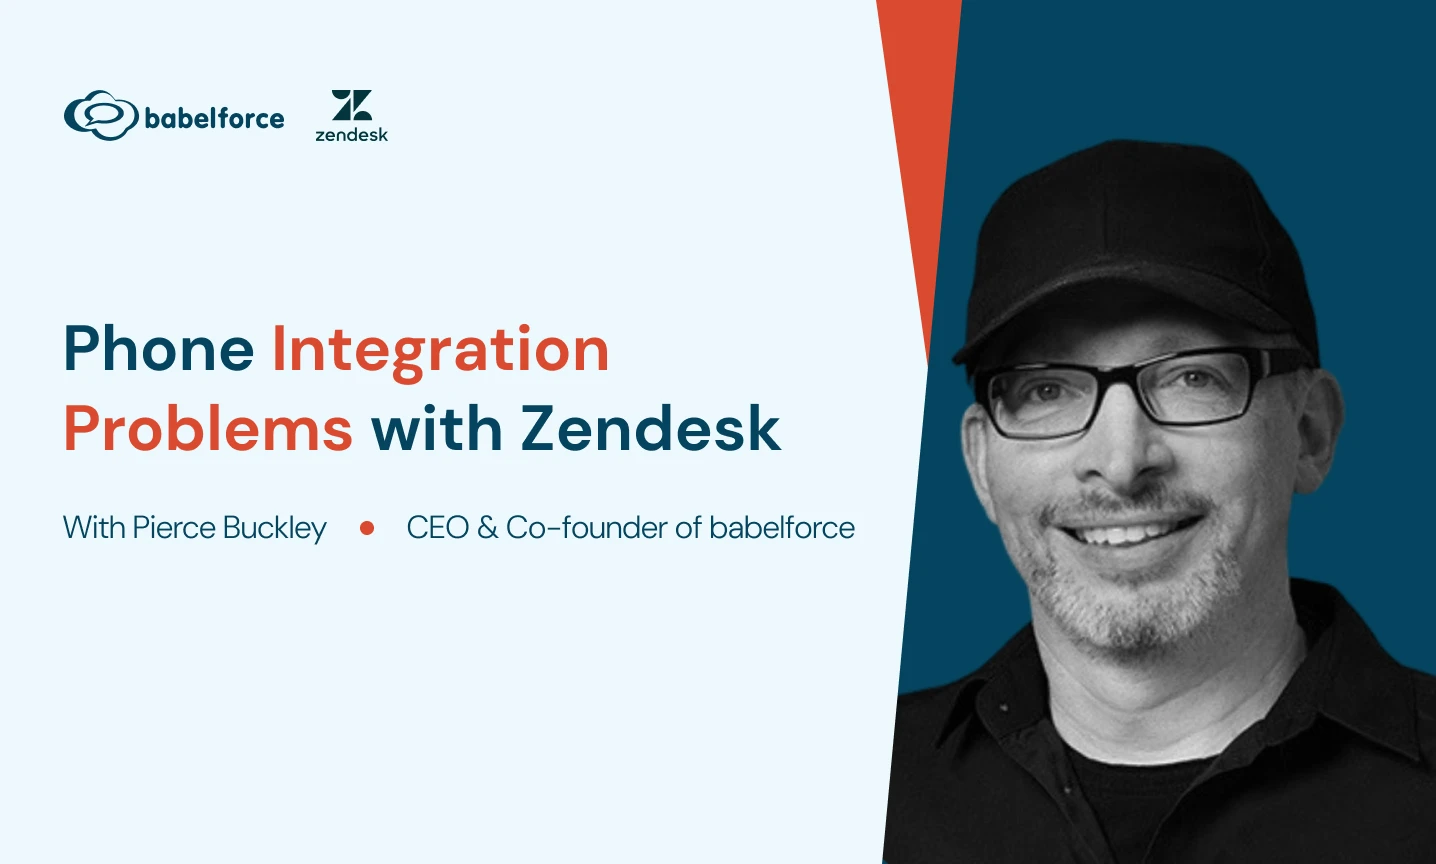 Phone integration problems with Zendesk